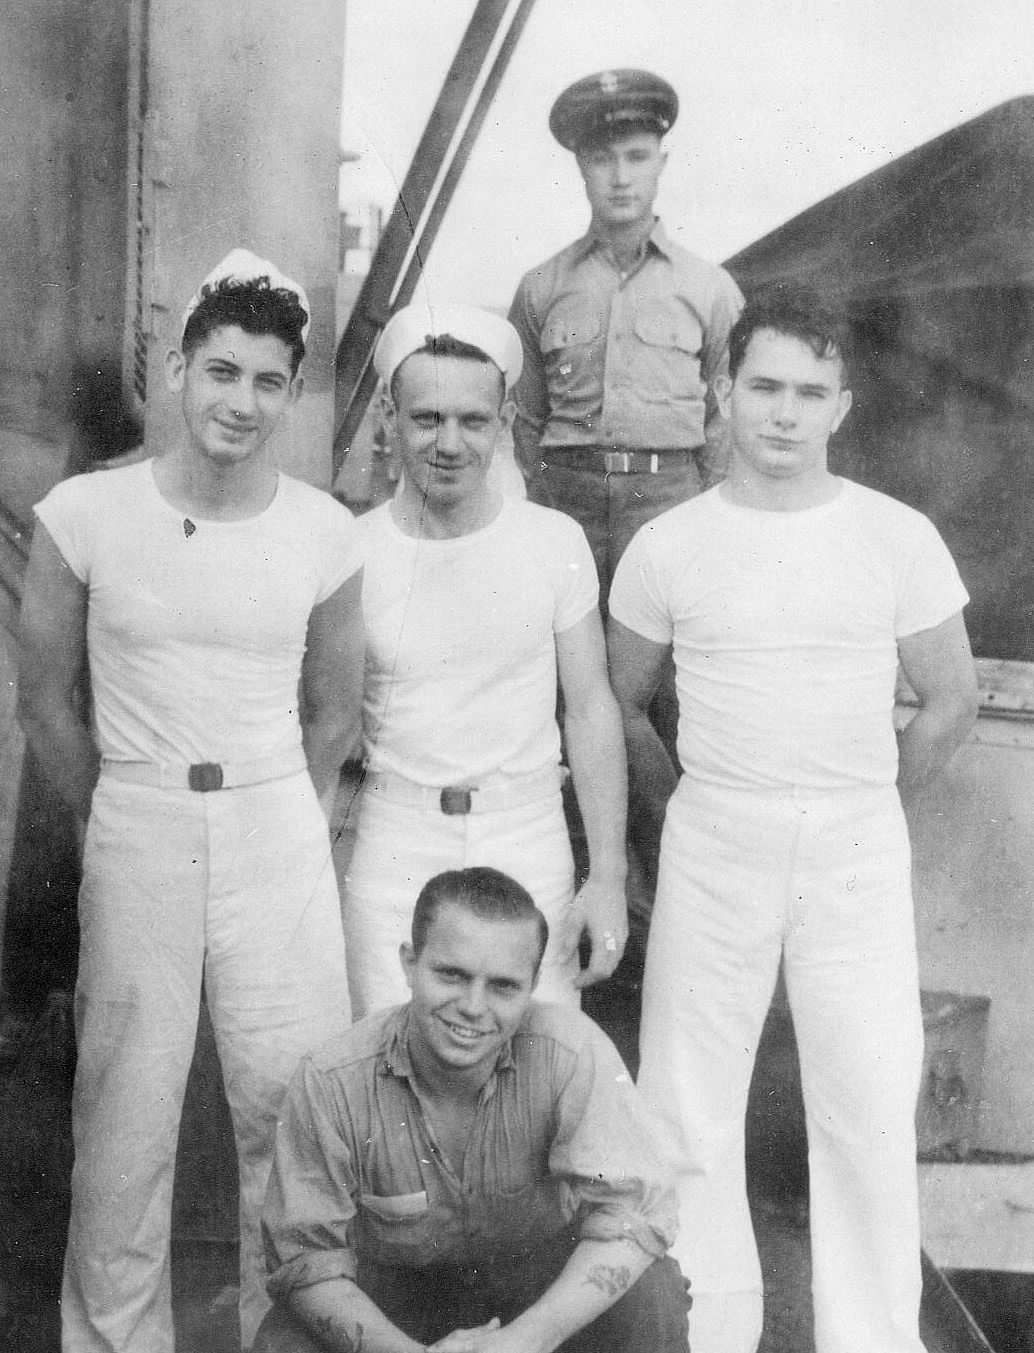 Supply Dept.<br>BACK: T. Perrin.<br>MIDDLE ROW (L→R) M. Horkman,W. Ball,V. Floyd.<br>FRONT: G. Ritenour.